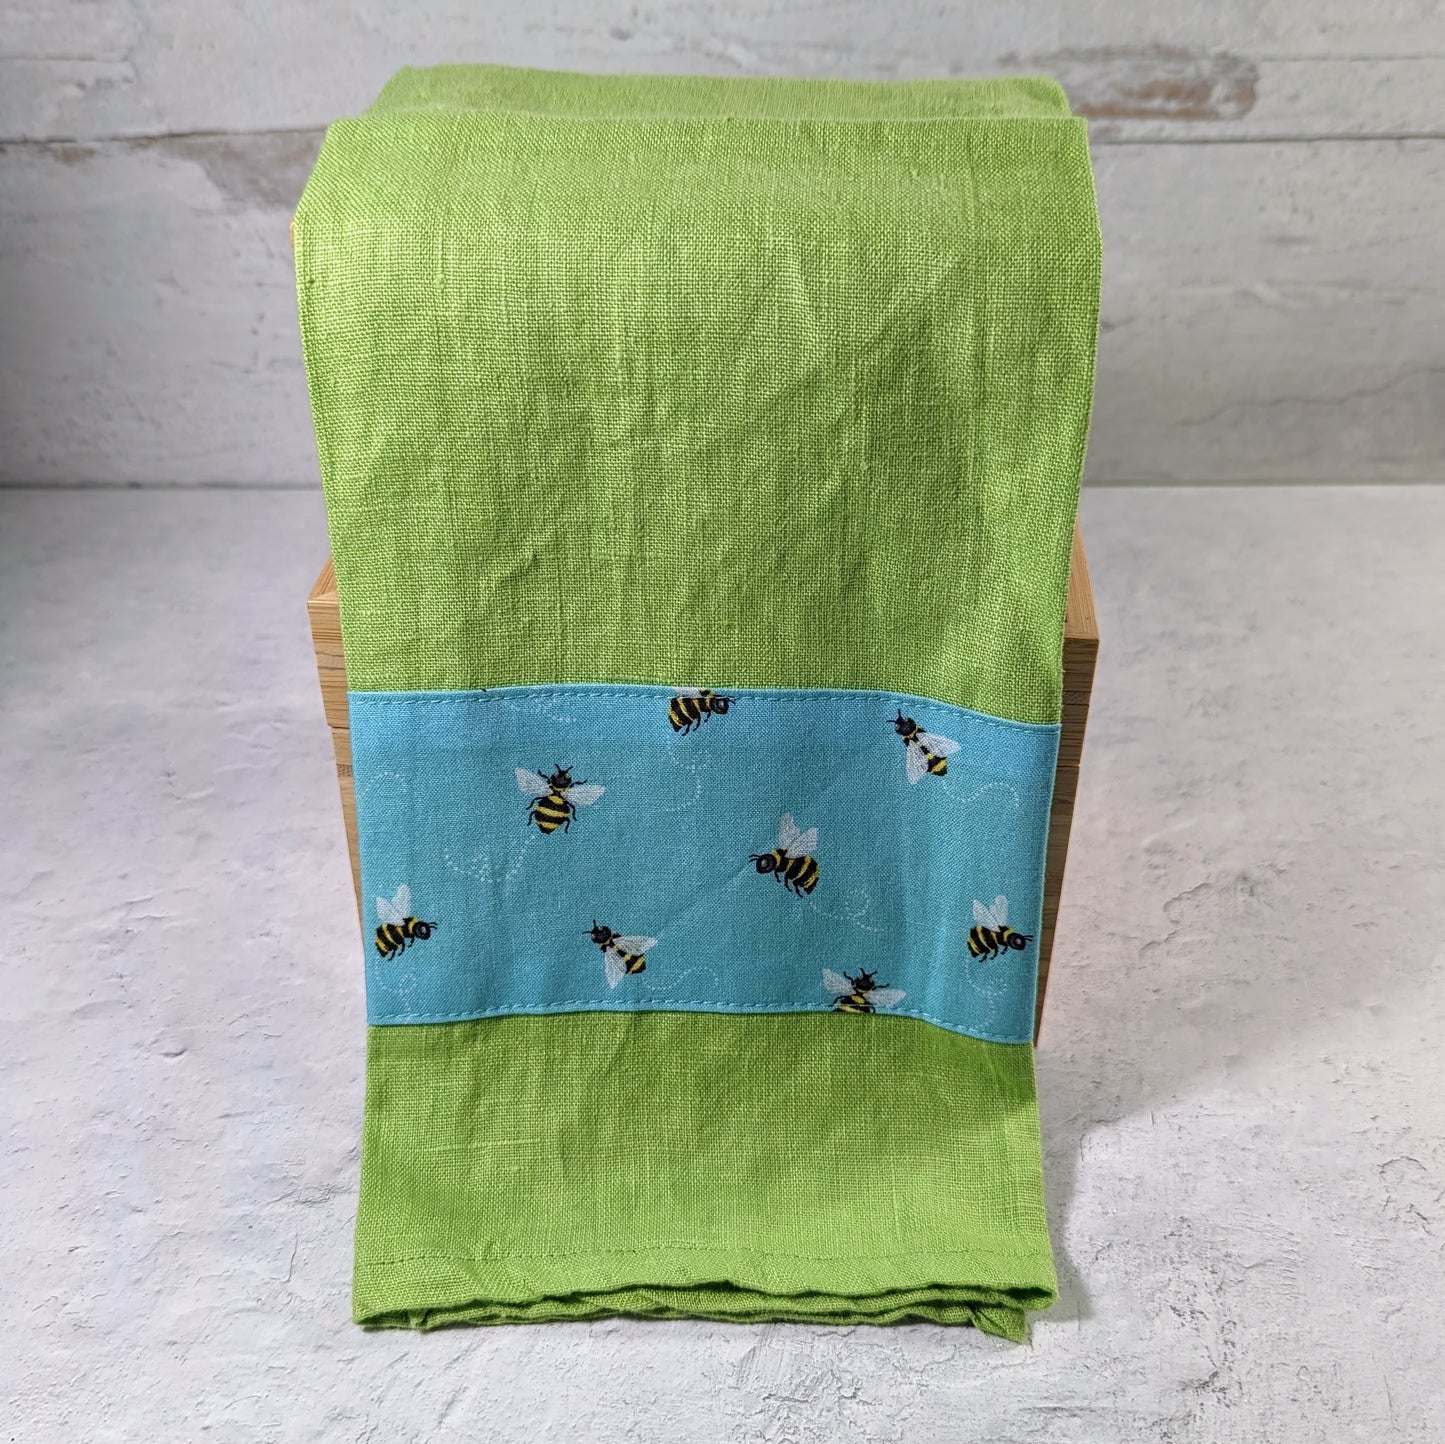 Busy bees accent linen kitchen towel